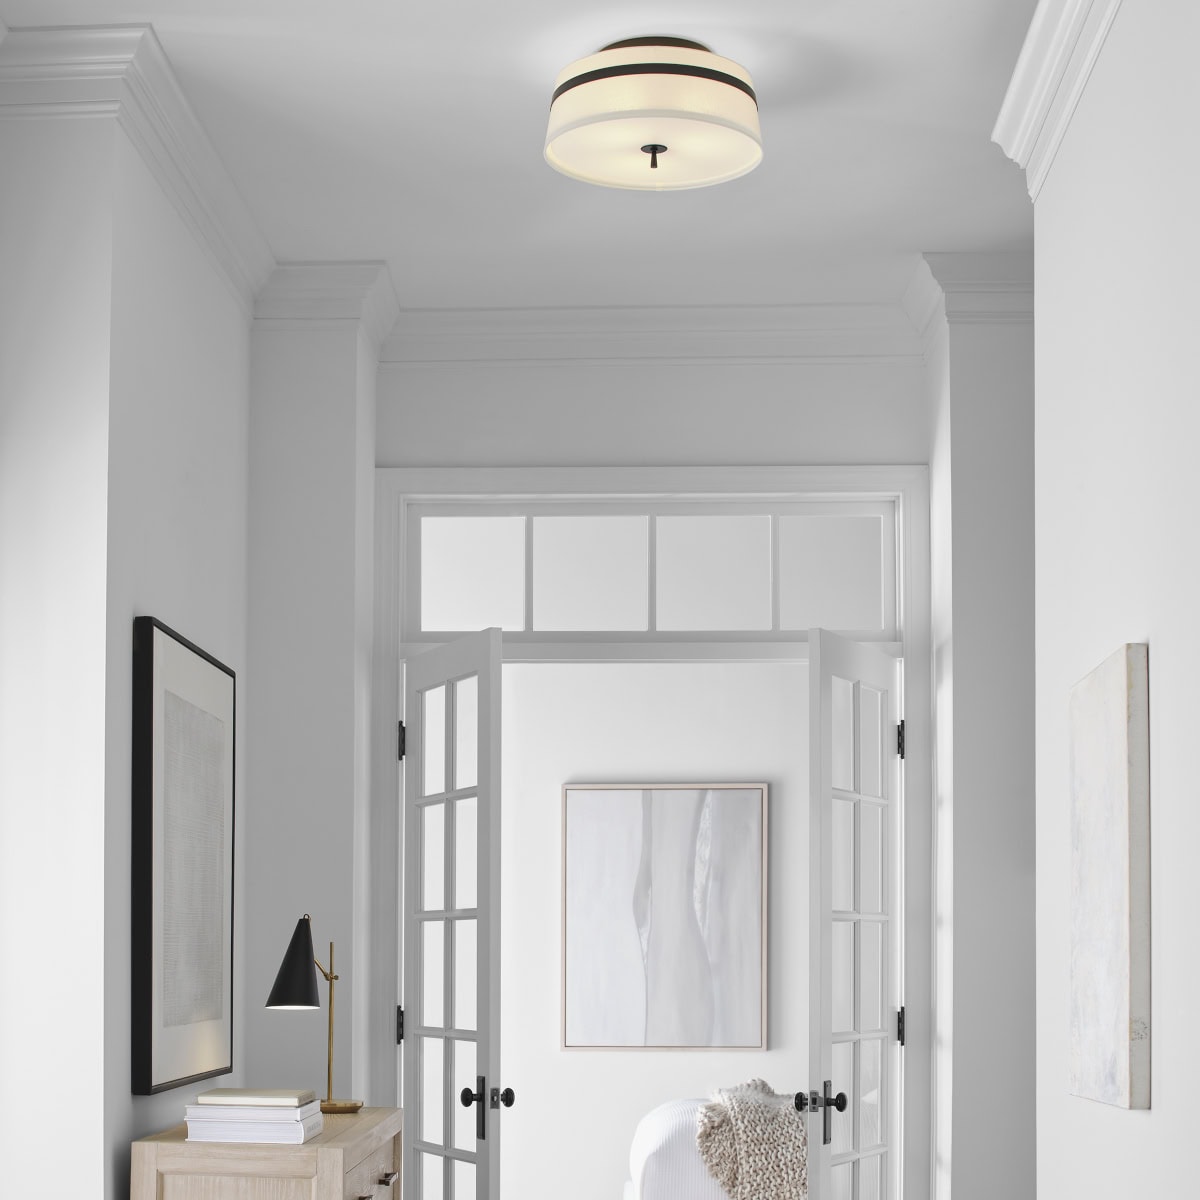 insitu shot a cordlandtl ceiling light in the entry of a home